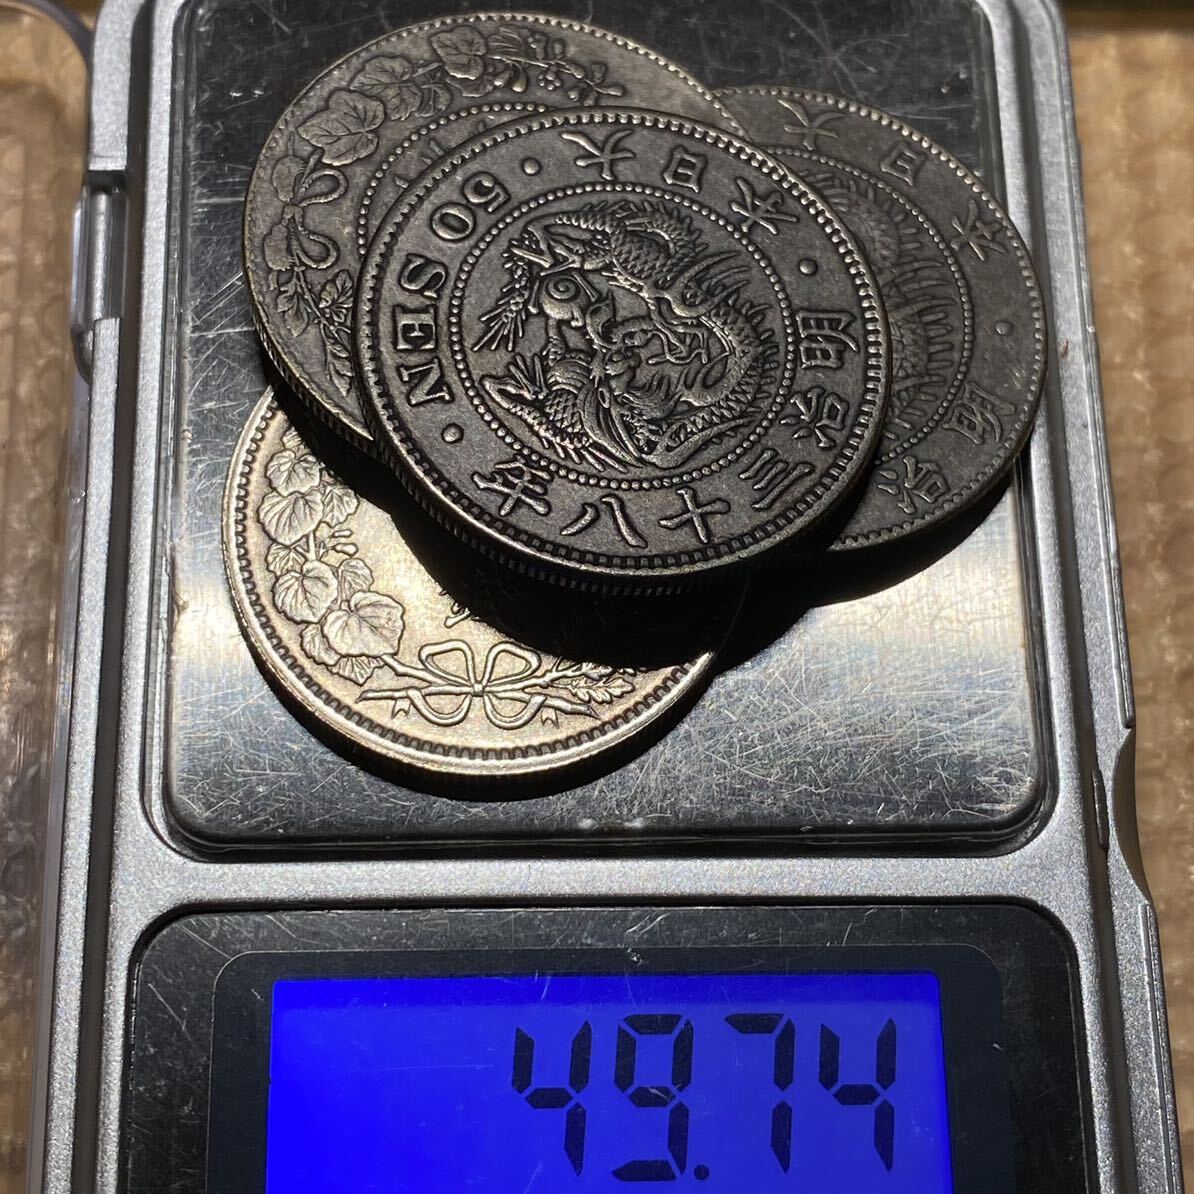  Japan old coin asahi day dragon small size 50 sen silver coin 4 sheets summarize large dragon . 10 sen silver coin total approximately 49.74g one jpy money coin antique goods coin collection 